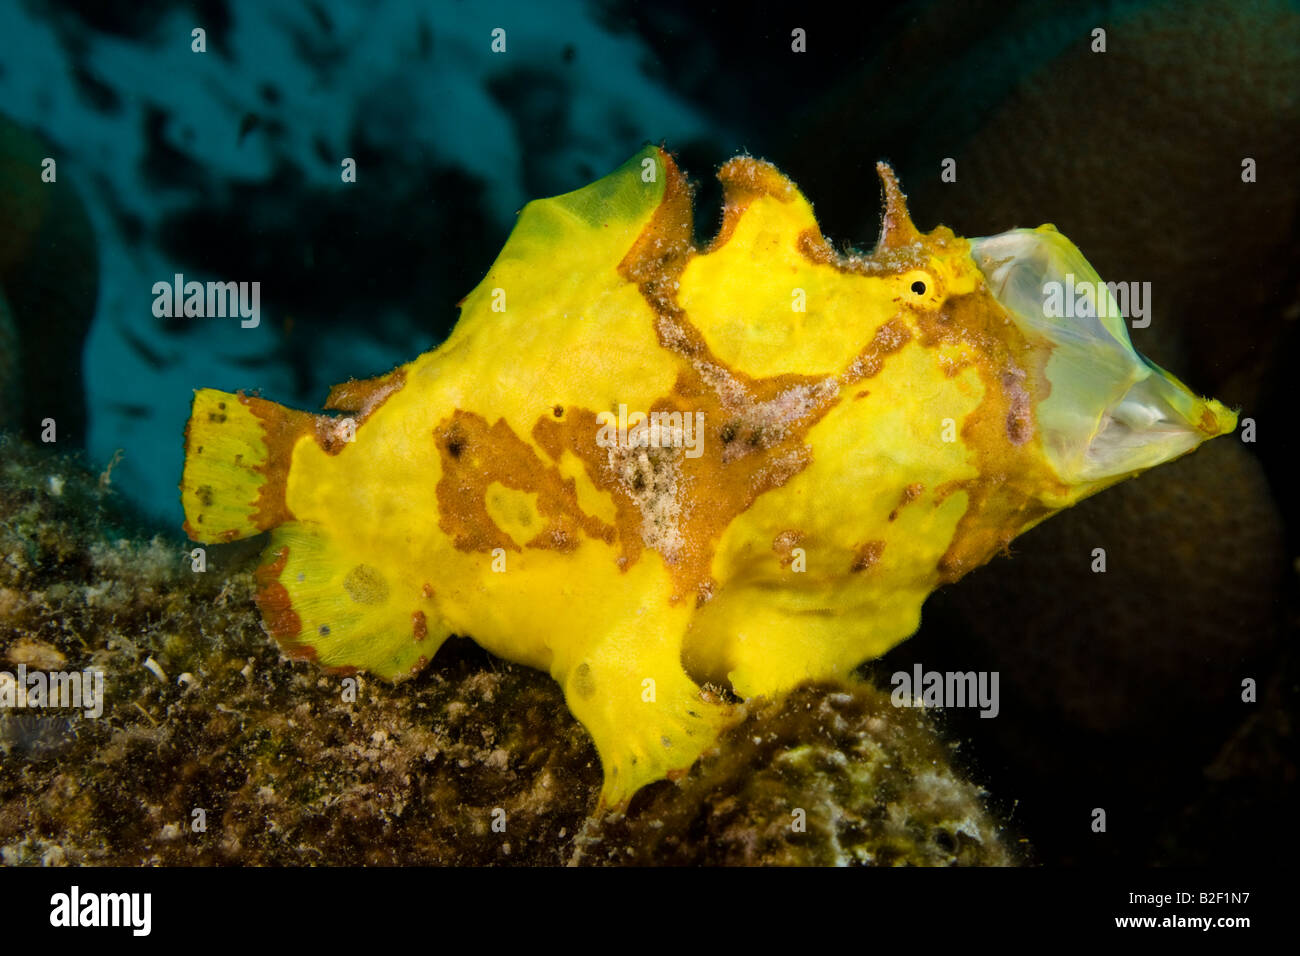 A longlure frogfish, Antennarius multiocellatus, opens it's mouth in a yawning/stretching exercise. Bonaire, Caribbean. Stock Photo